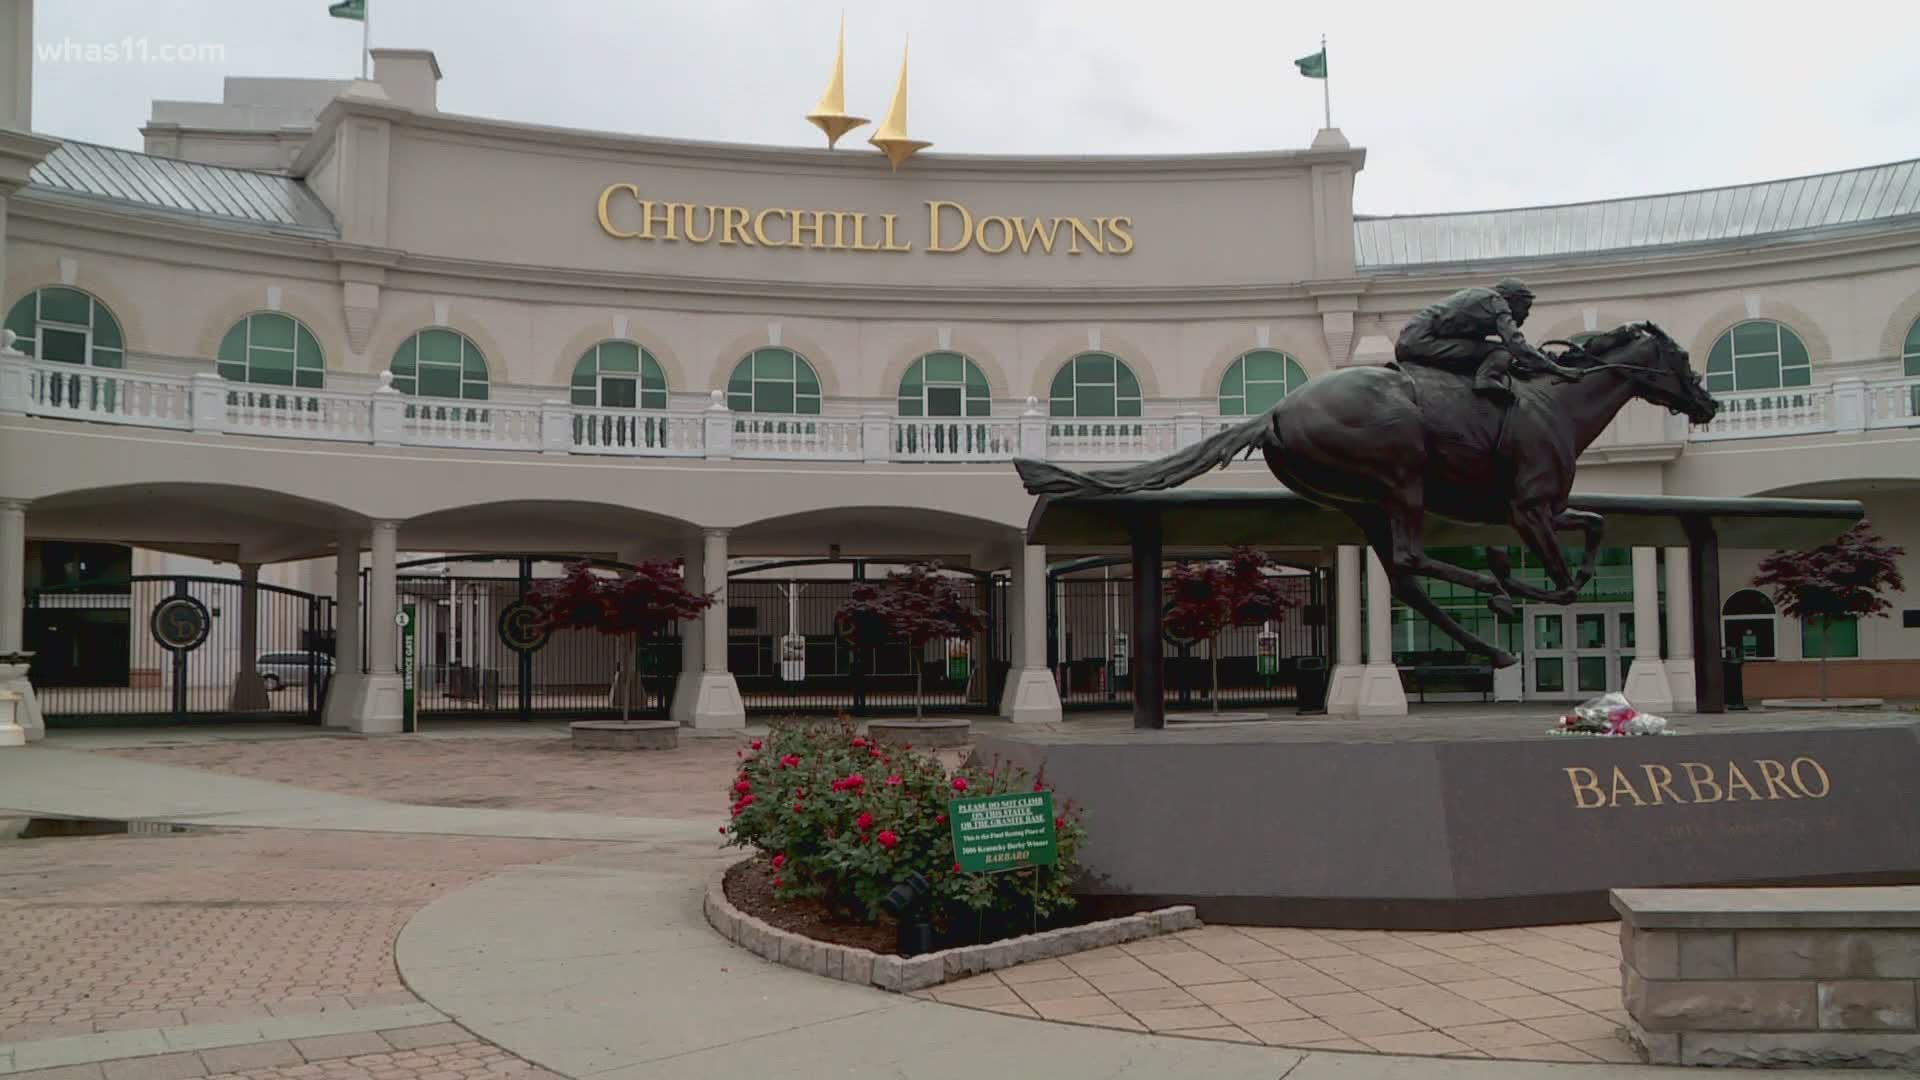 Churchill Downs announced on Friday, August 21 its decision to run the 146th Kentucky Derby without fans for the first time in the history of the event.